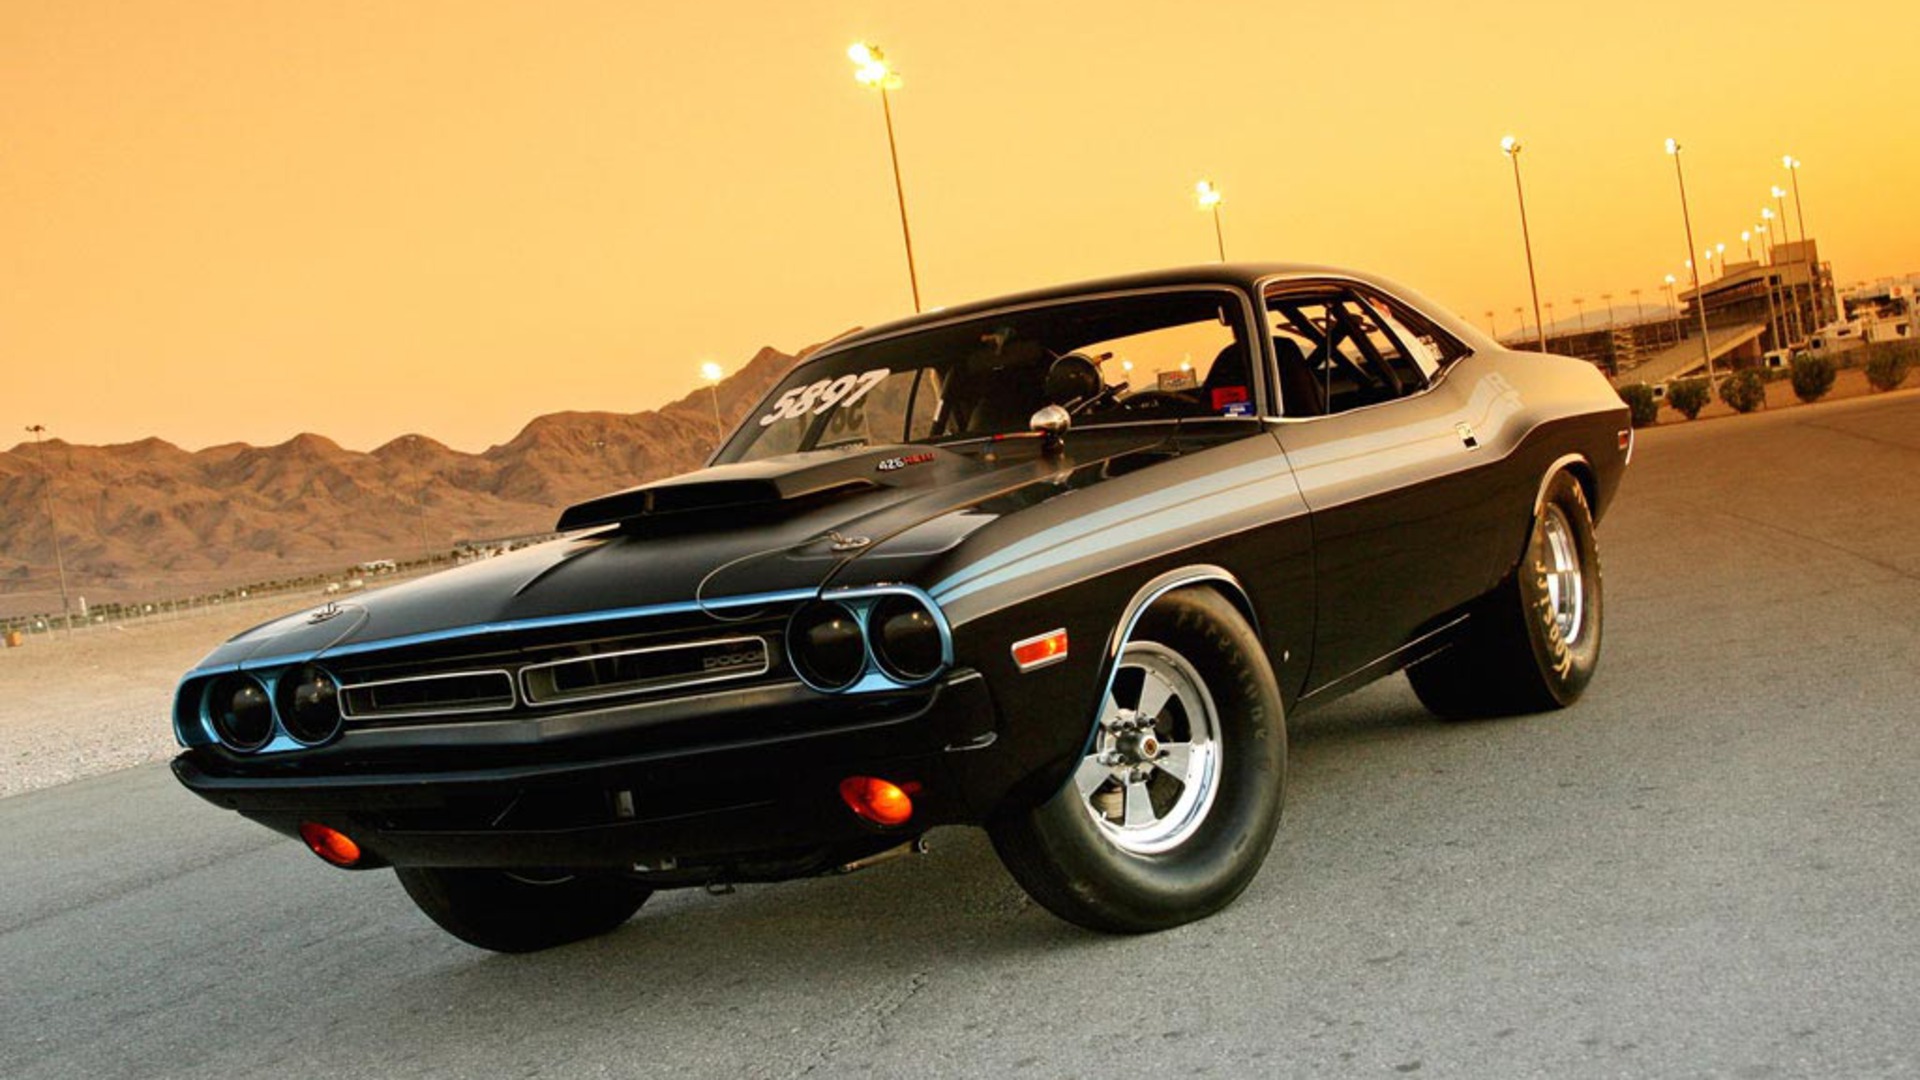  wallpaper picture hd Muscle Car Wallpaper image download 1920x1080